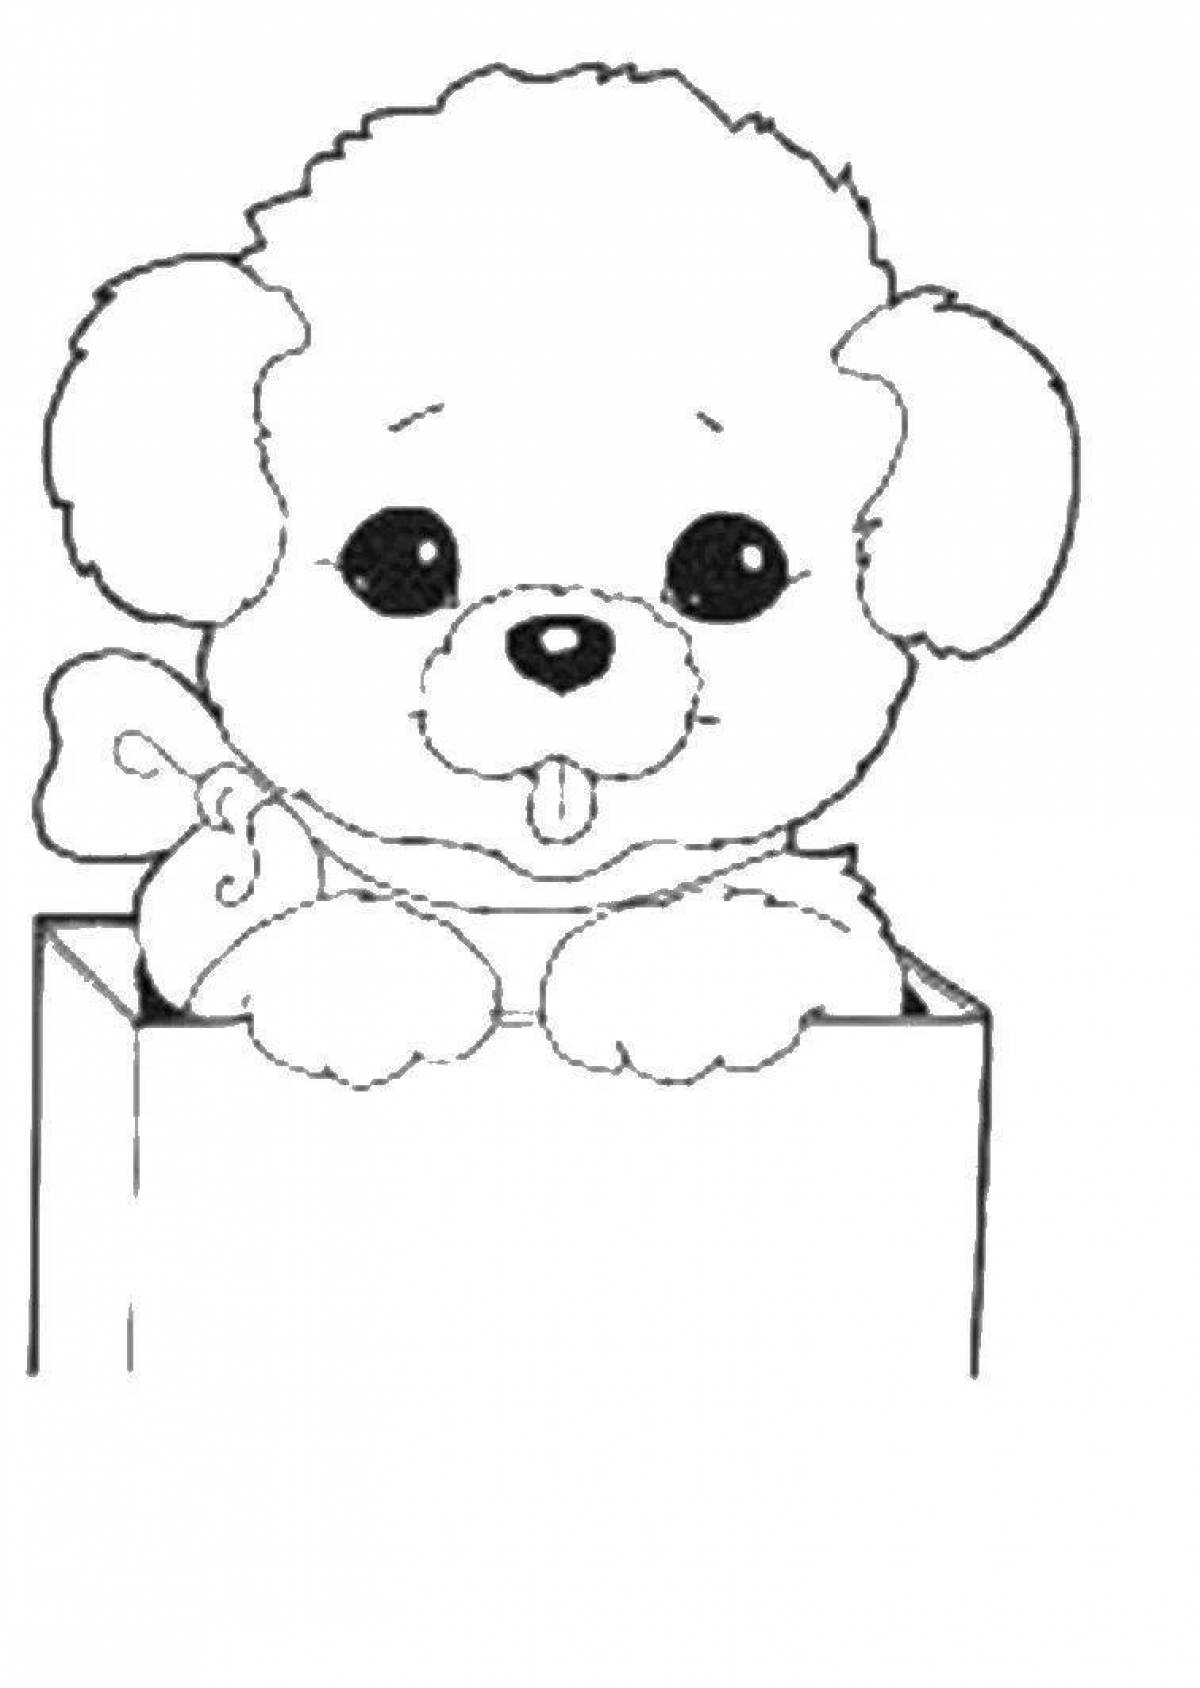 Cute puppy coloring page